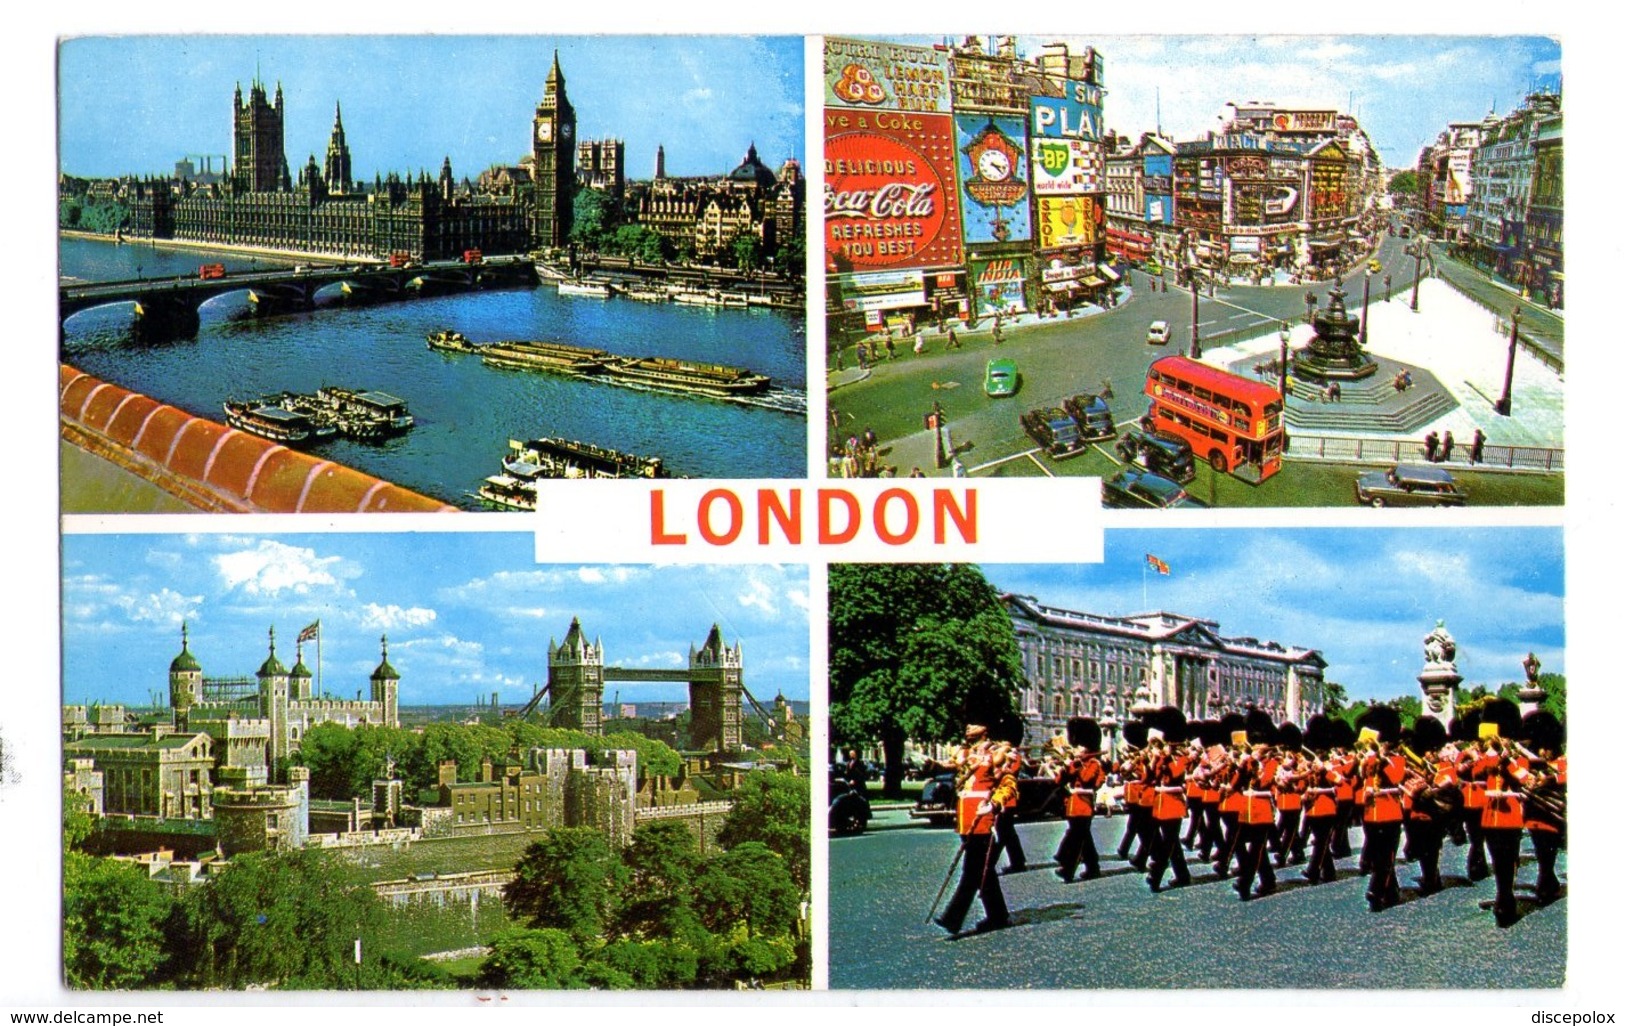 S2020 Postcard, Small Size - ENGLAND, LONDON, Piccadilly Circus, Guards Band Near Buckingham Palace _ NOT WRITED - Piccadilly Circus